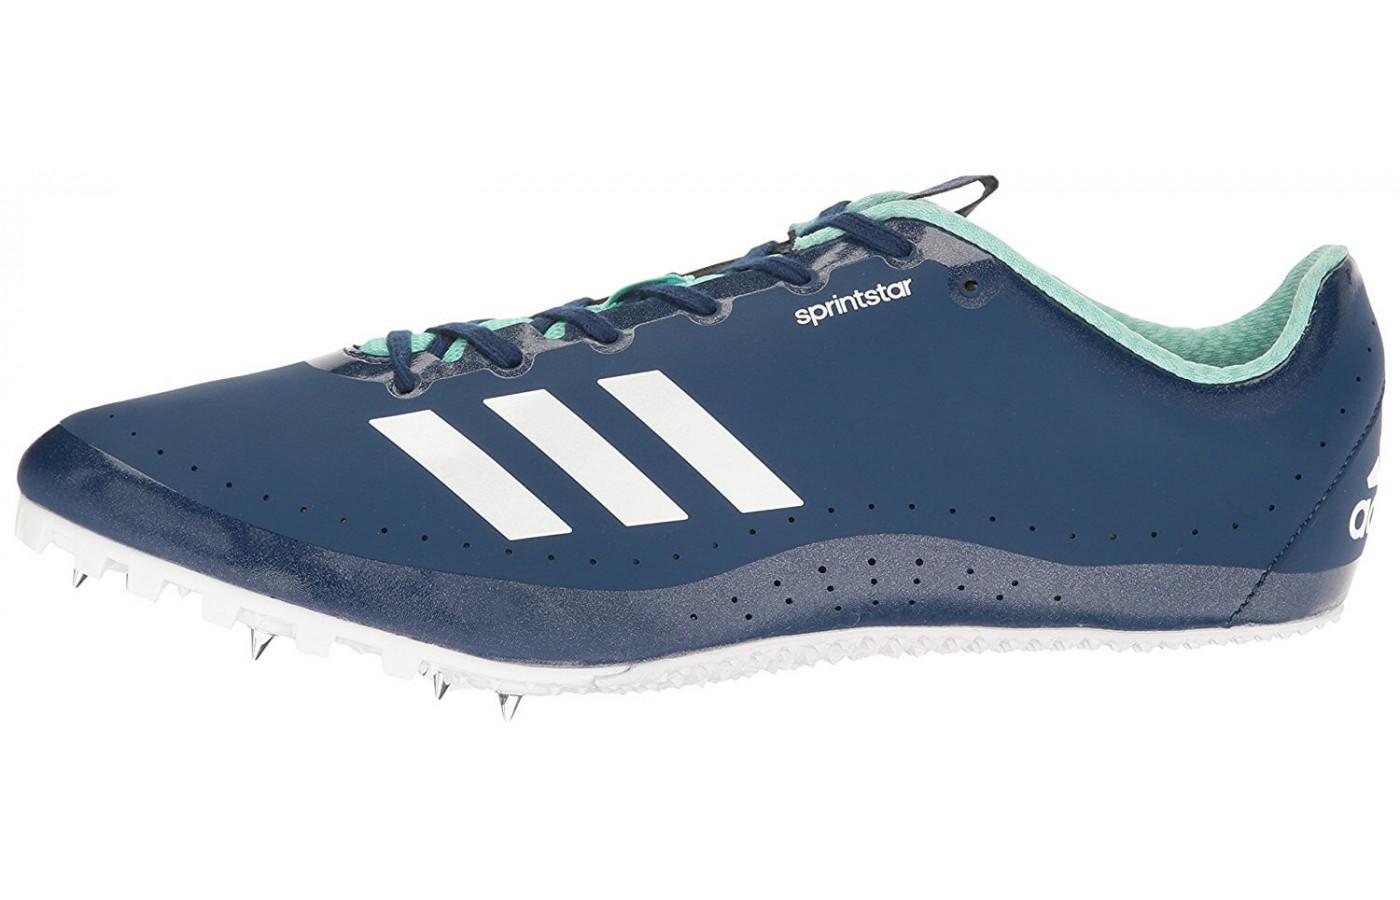 The Adidas Sprintstar is designed for racing up to 400 meters